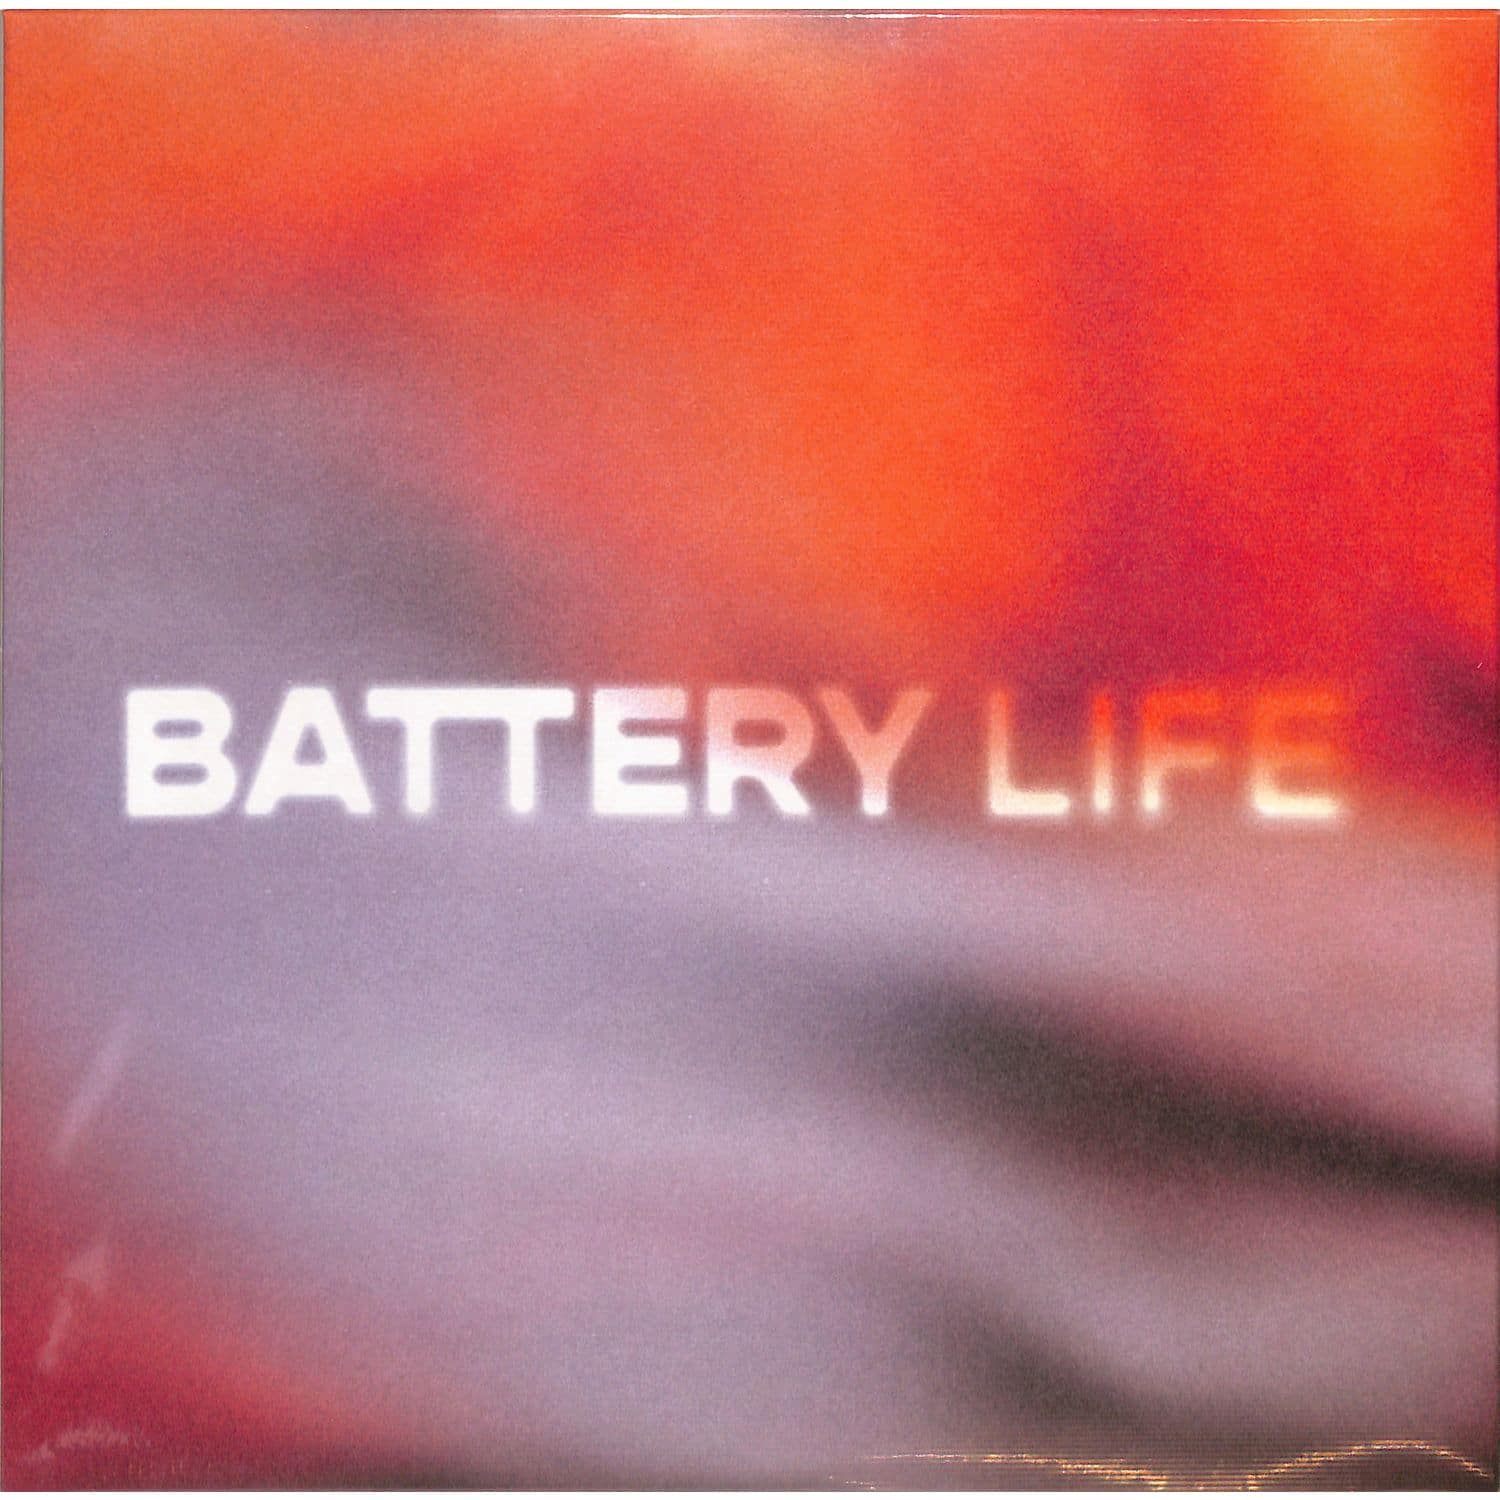  Neil Cowley - BATTERY LIFE 